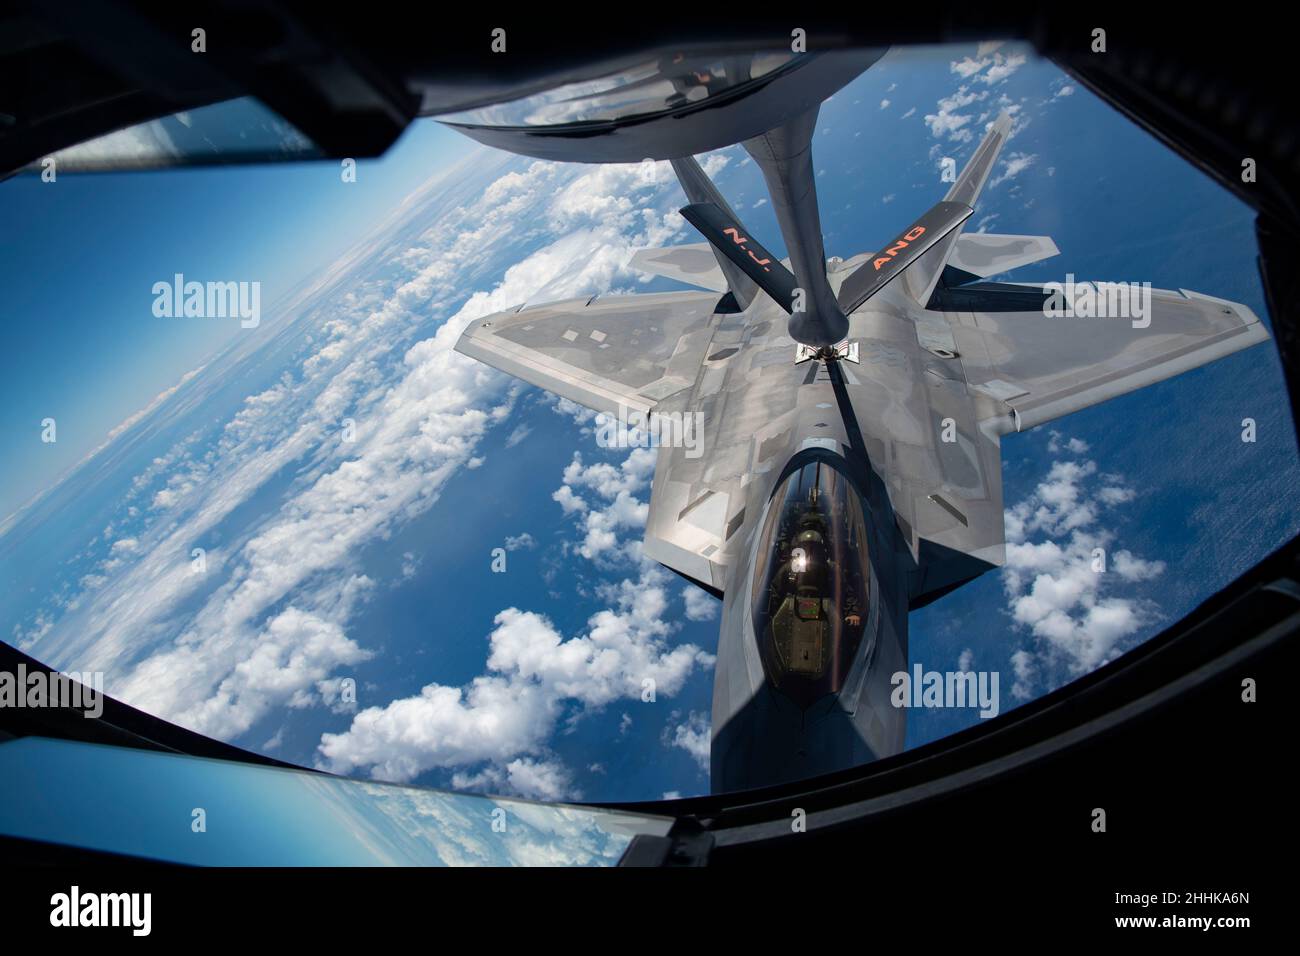 A Hawaii Air National Guard F-22 Raptor is refueled by a New Jersey Guard KC-135R Stratotanker during Sentry Aloha, August 16, 2021, above the Pacific ocean near Hawaii. Sentry Aloha '21 is a three-week exercise, hosted by the Hawaii Air National Guard's 154th Wing, that provides pilots, aircrew, and maintainers, from the Total Force, with realistic combat training through a series of flight missions. (U.S. Air National Guard photo by Senior Airman Andrea A. S. Williamson) Stock Photo